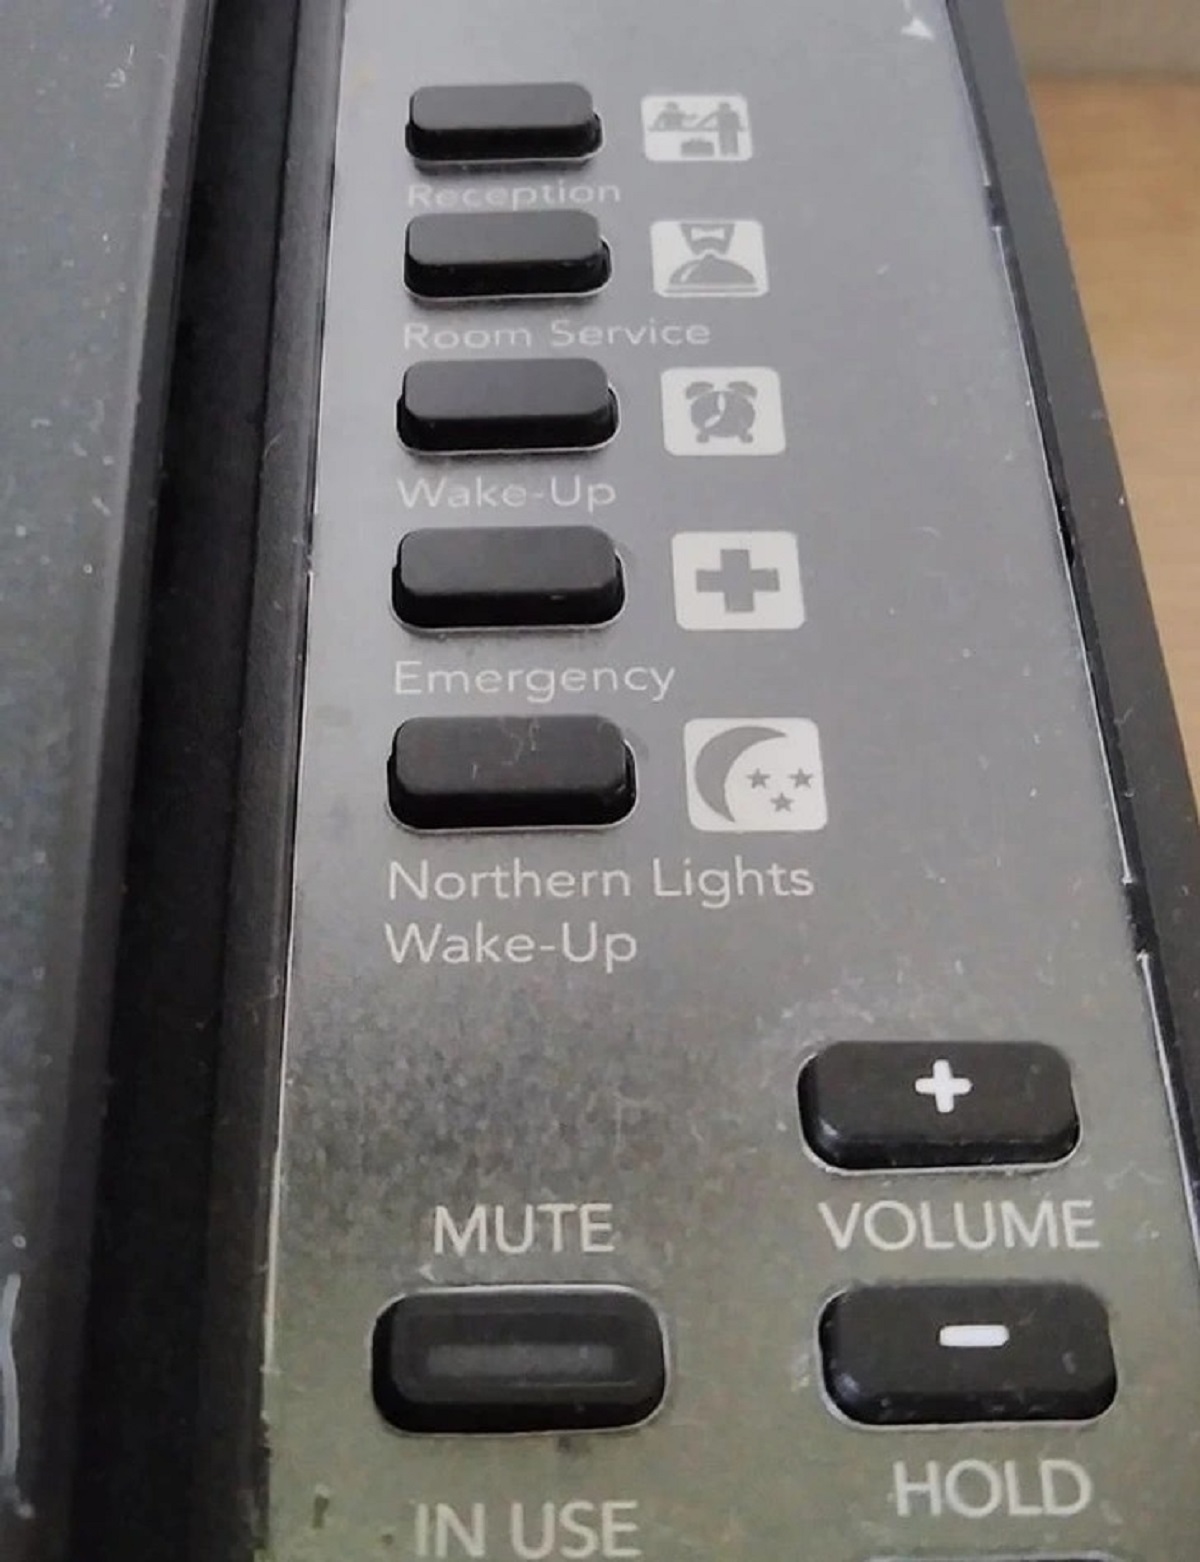 “My hotel phone in Iceland has a special button that will wake you up if there are northern lights in the sky.”